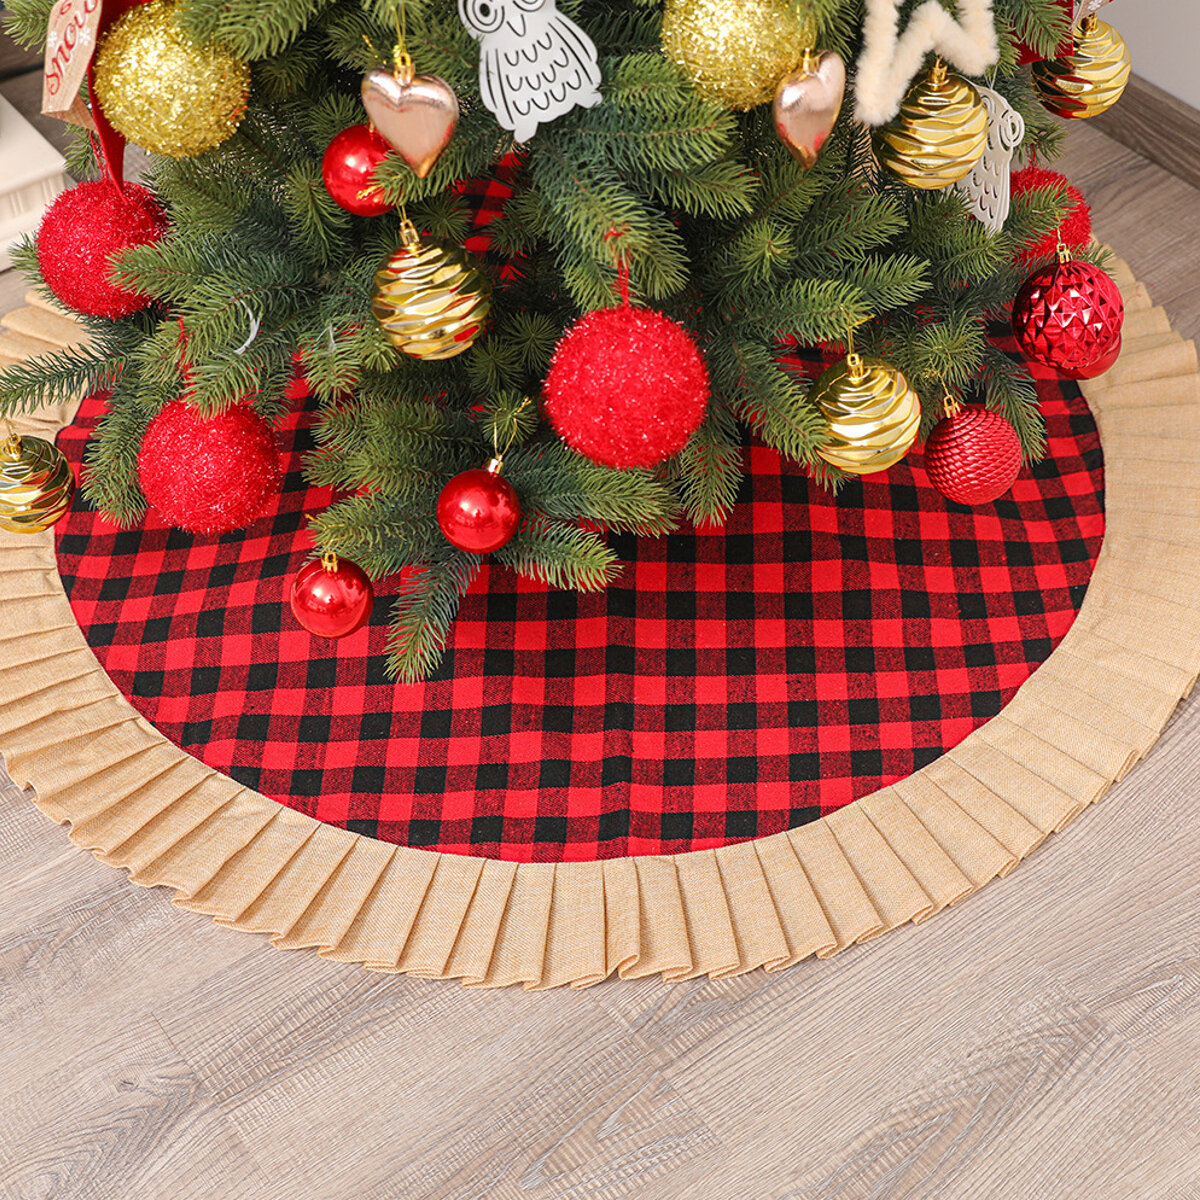 120cm Christmas Tree Skirt Aprons New Year Xmas Tree Carpet Foot Cover Red Round Carpet for Merry Christmas Decoration